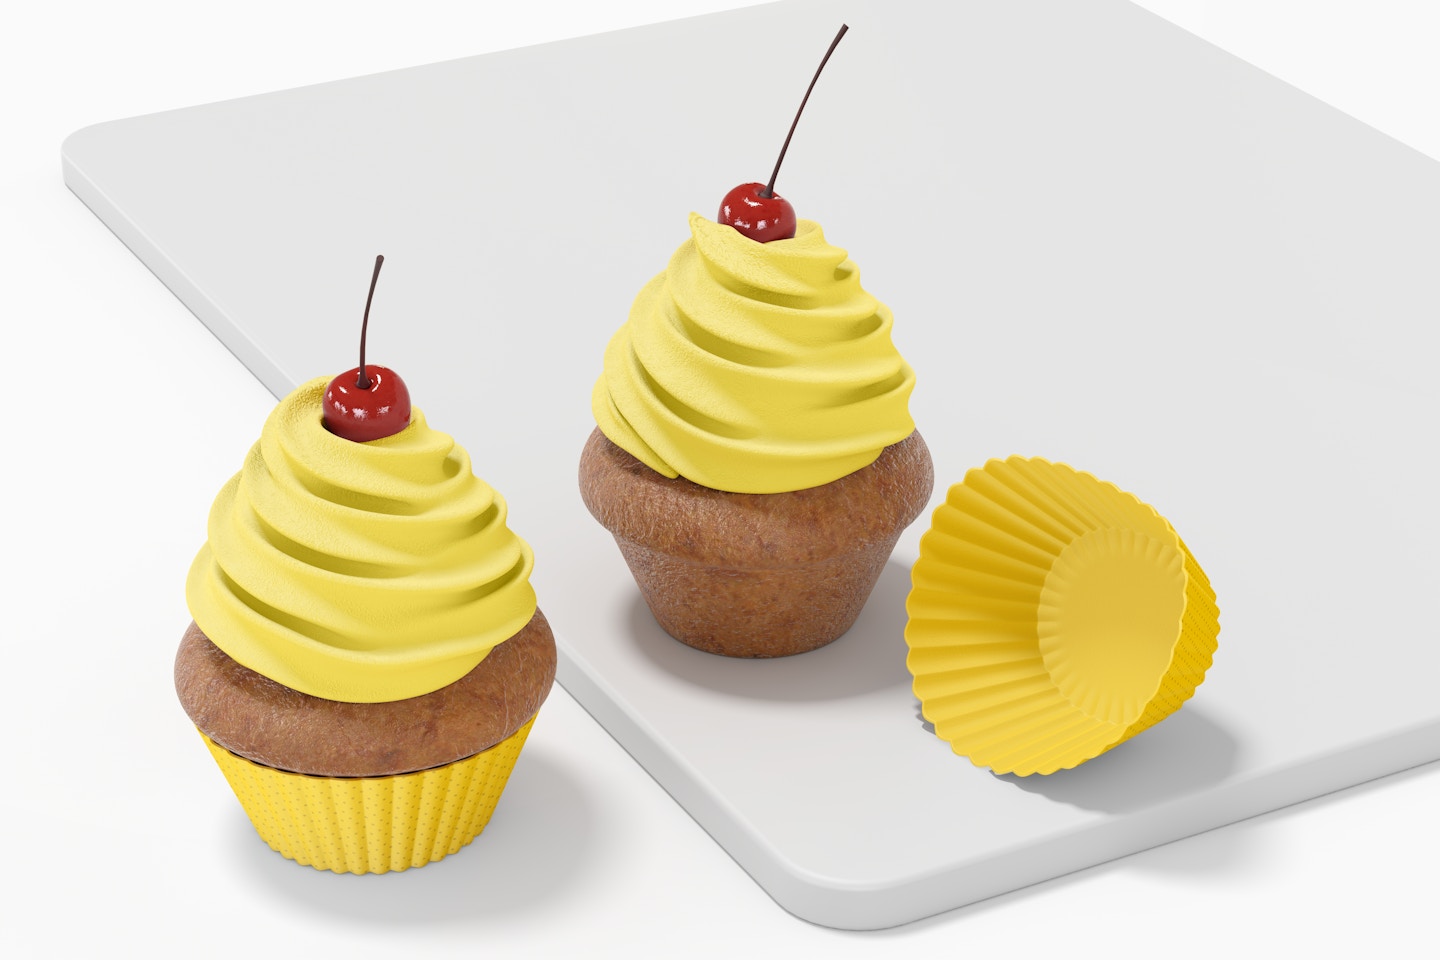 Cupcake with Silicone Baking Cup Set Mockup